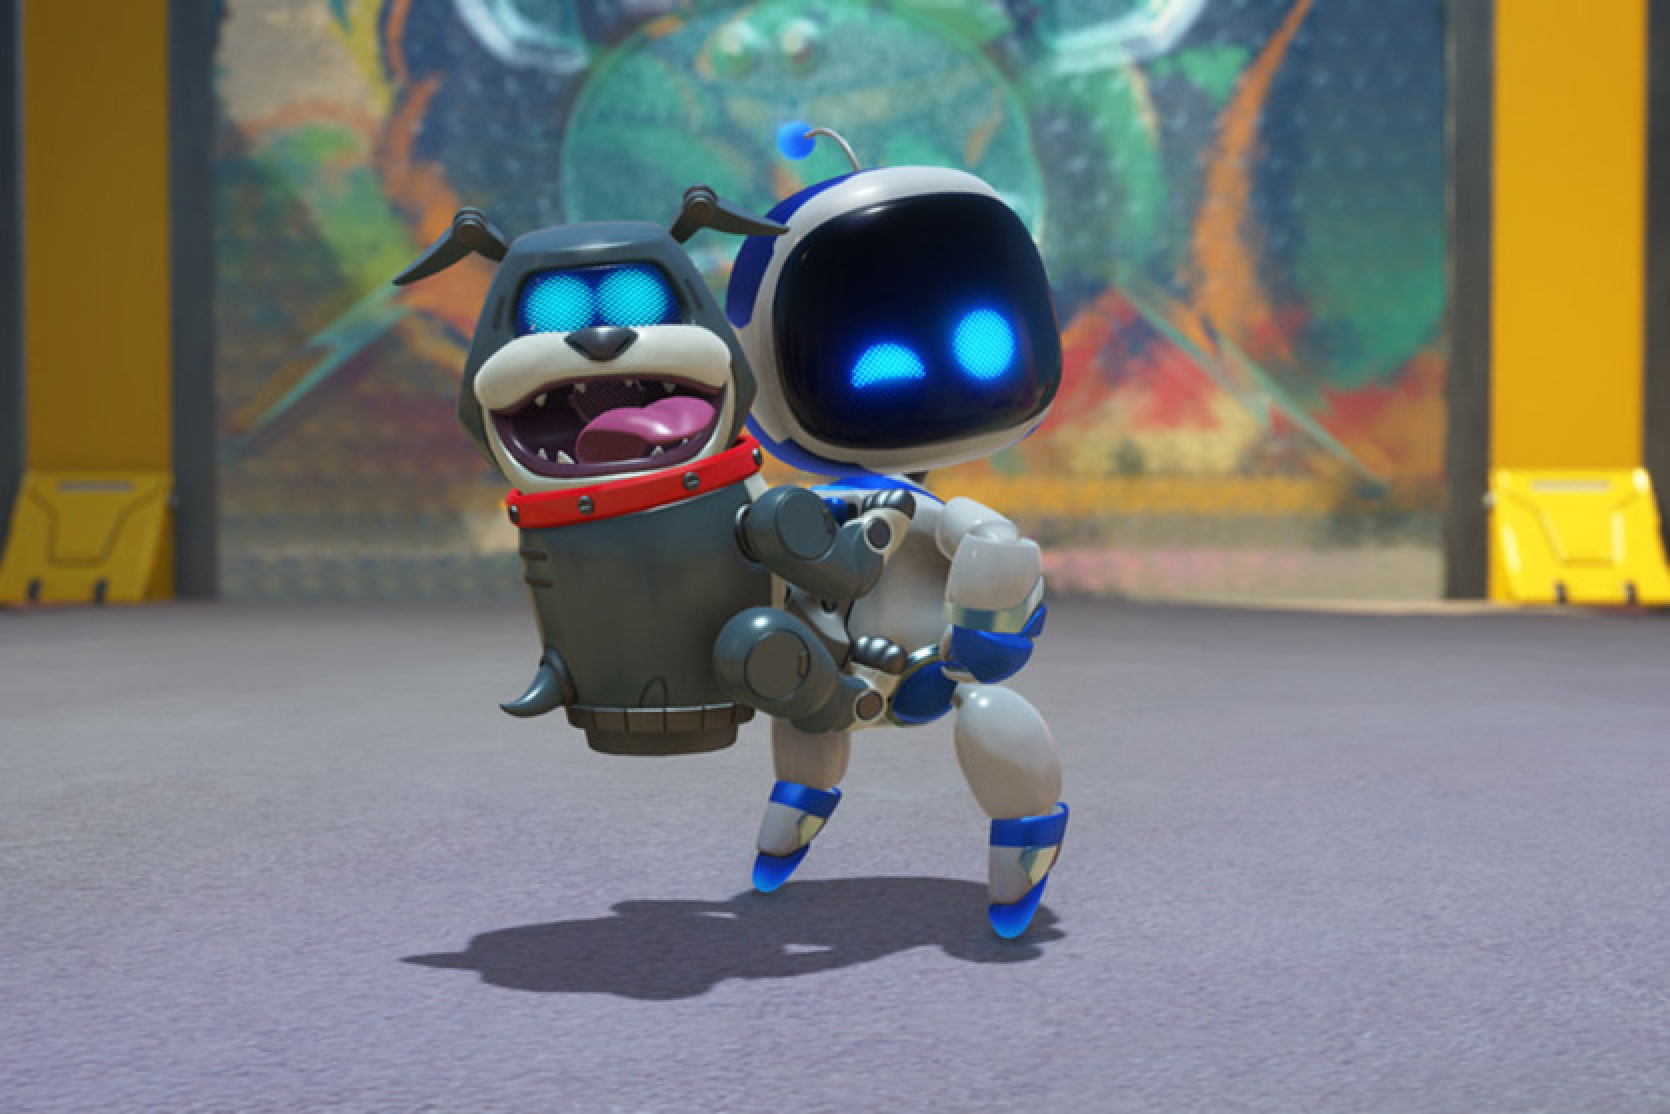 The new Astro Bot game will be released on PlayStation - the adventures of the famous character will begin on September 6